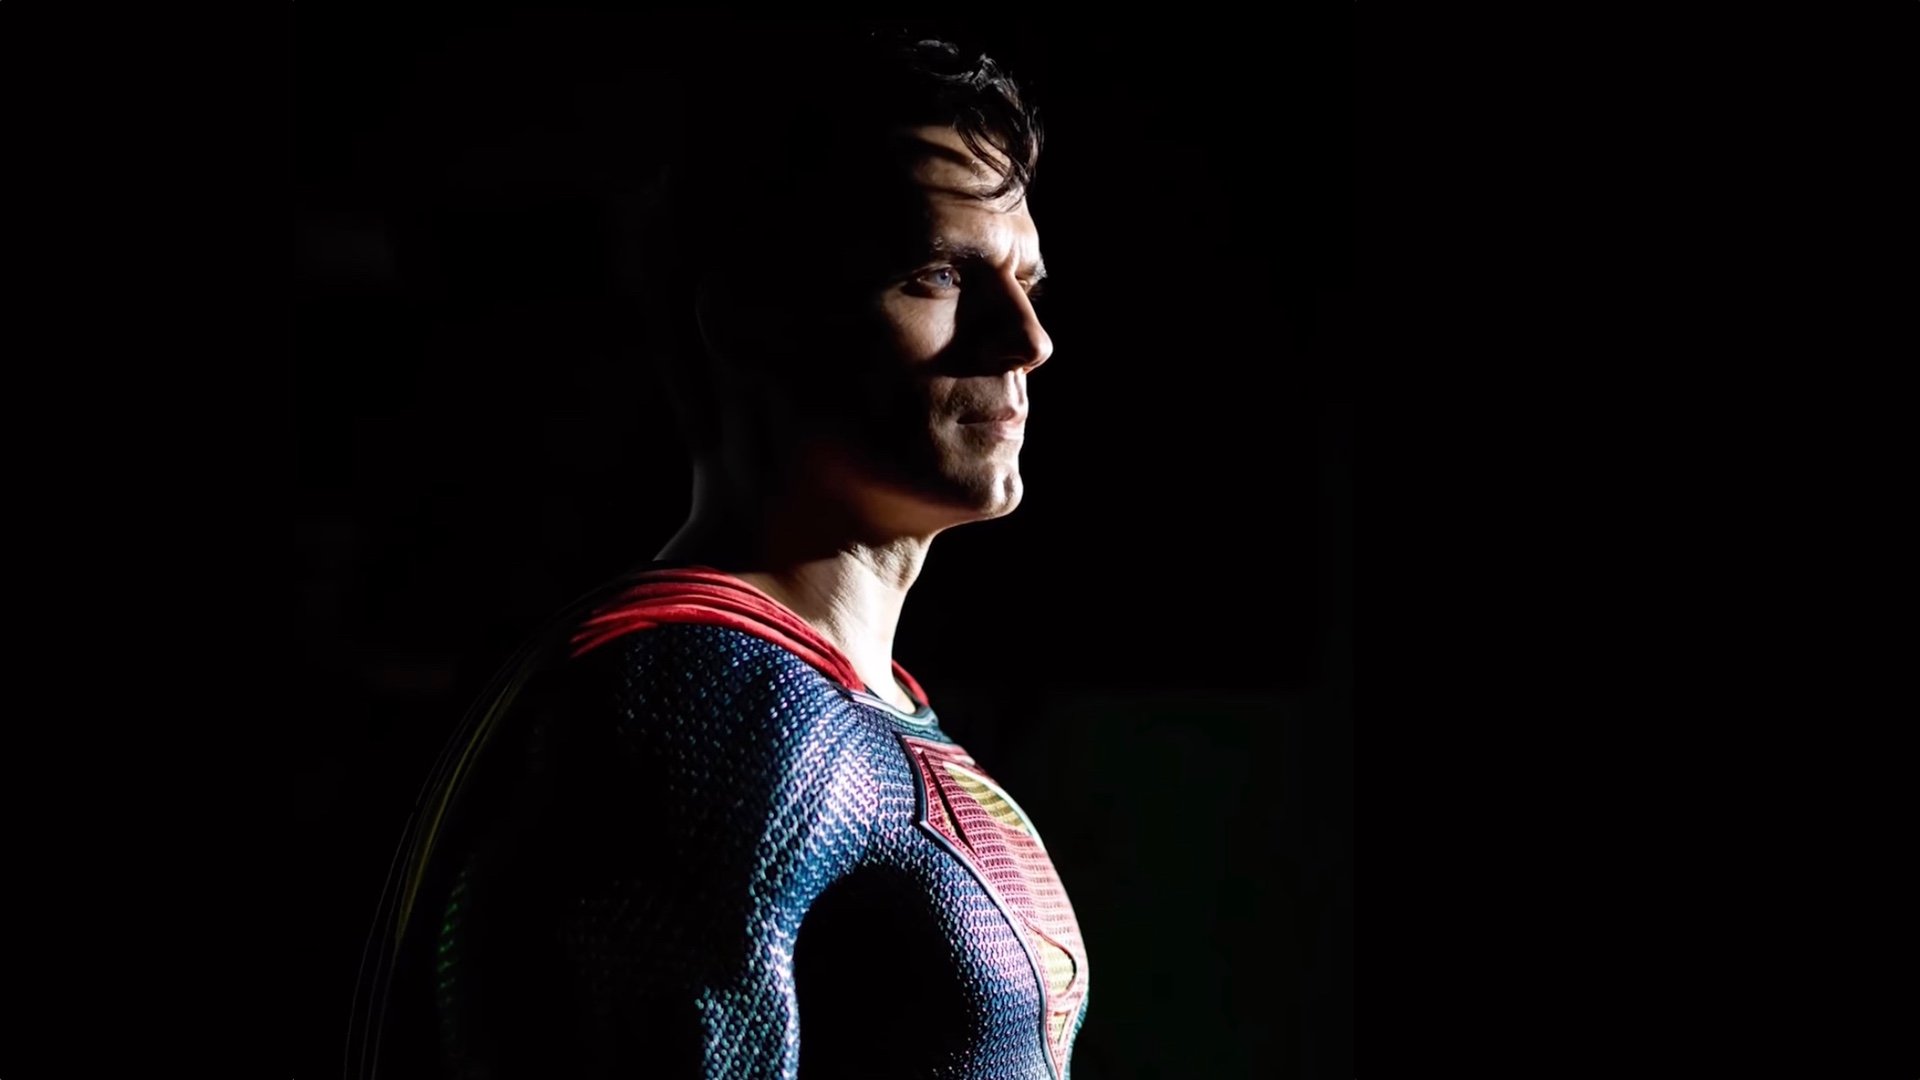 Man of Steel 2' Is Reportedly at a Standstill at Warner Brothers